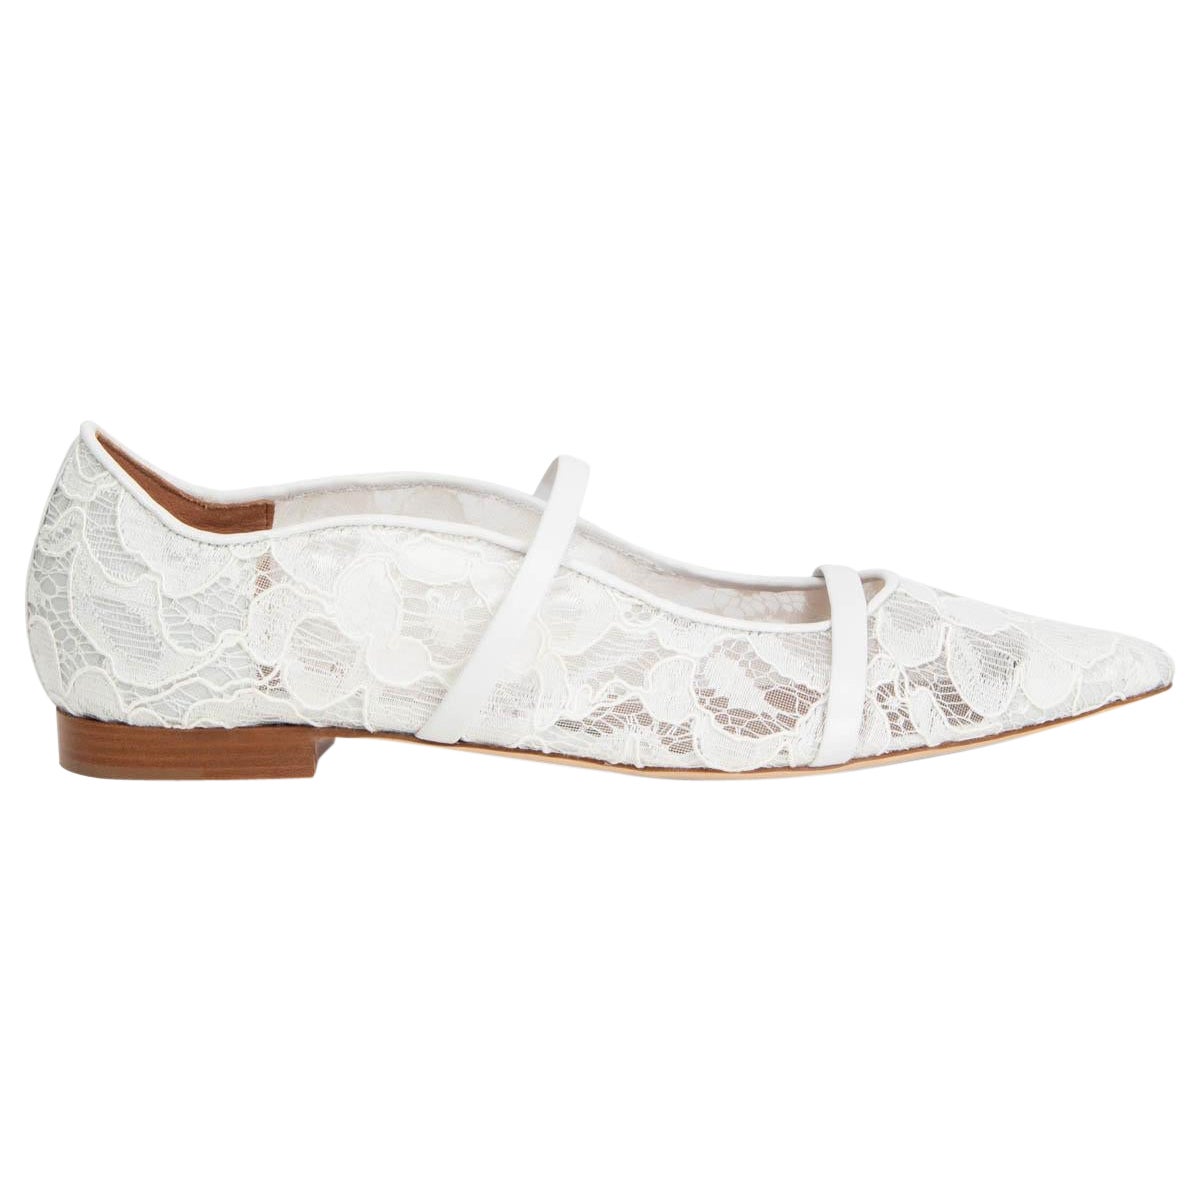 MALONE SOULIERS white lace MAUREEN Ballet Flats Shoes 38.5 For Sale